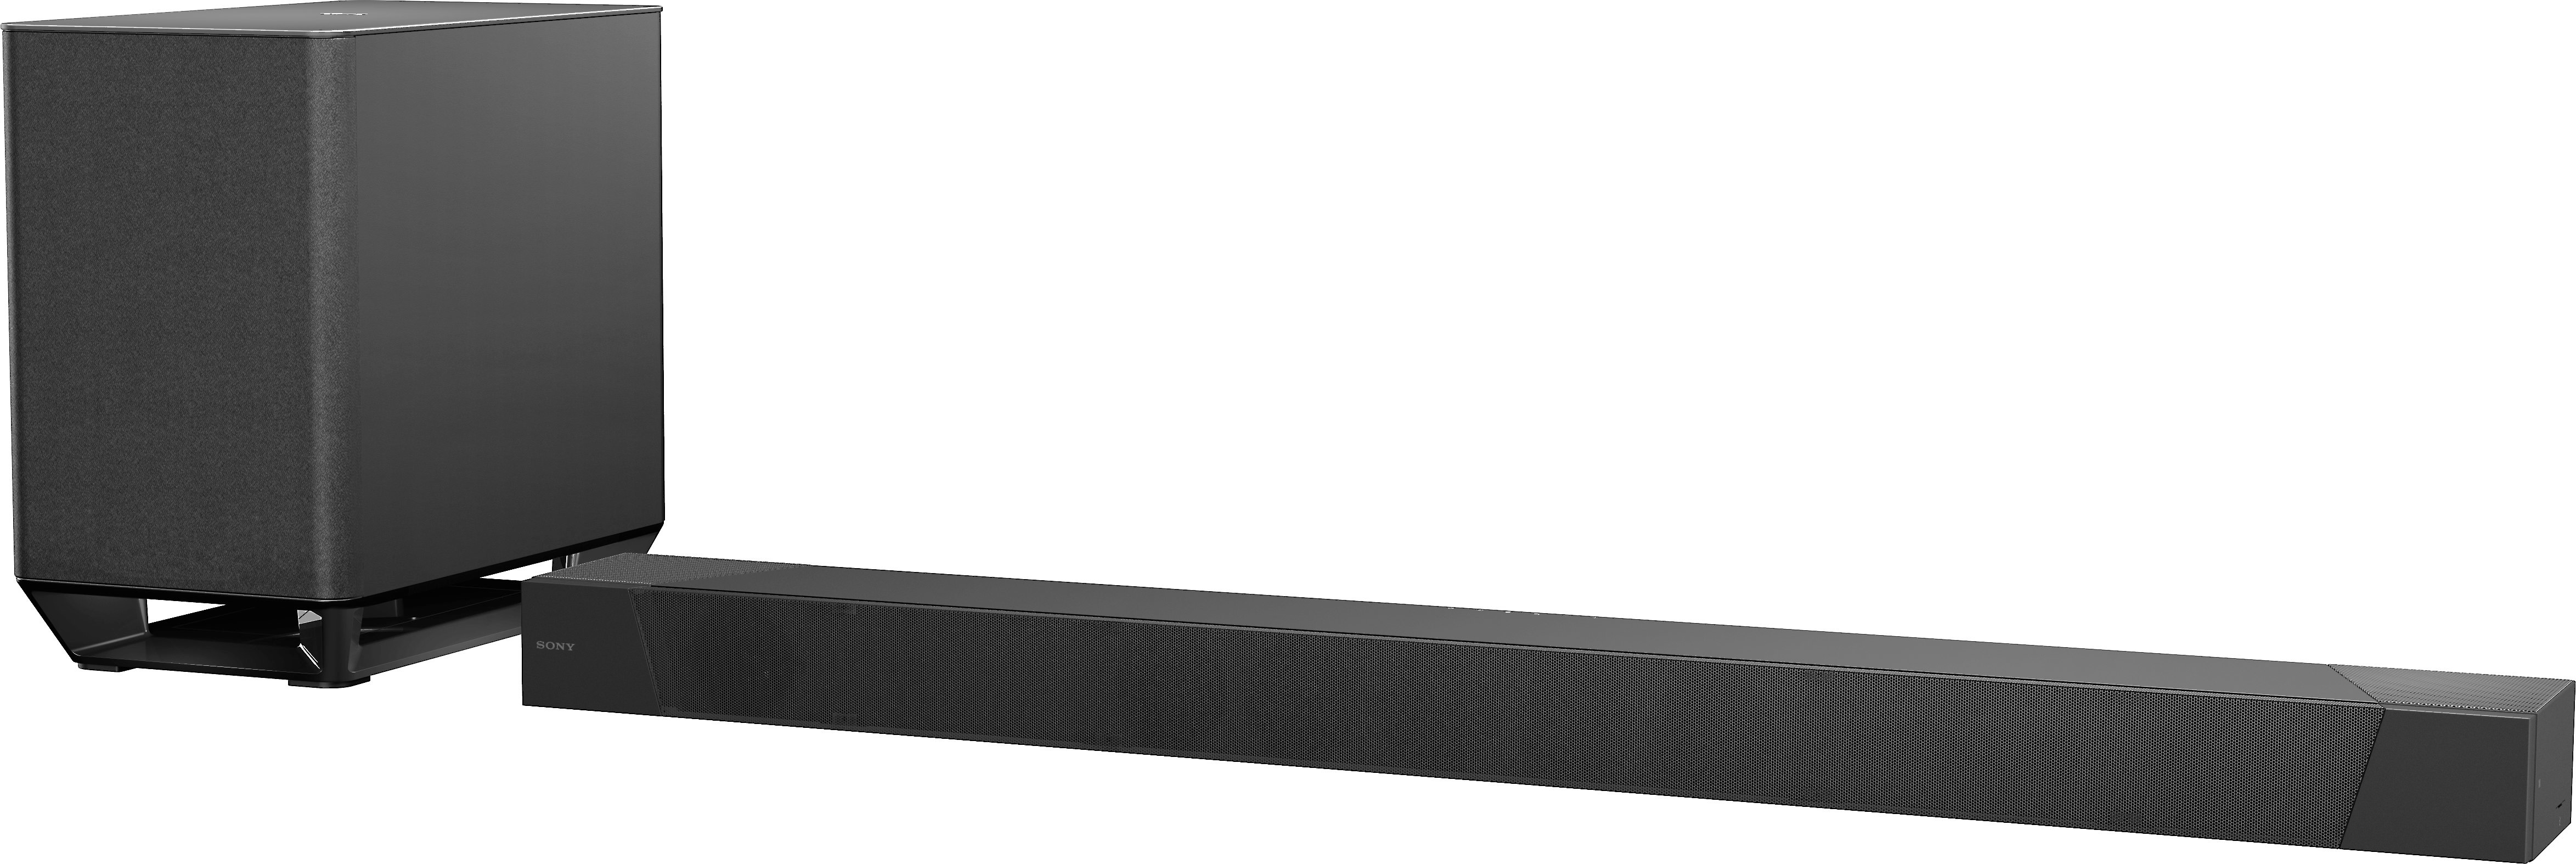 Sony HT-ST5000 Powered sound bar with 4K/HDR video passthrough, Dolby